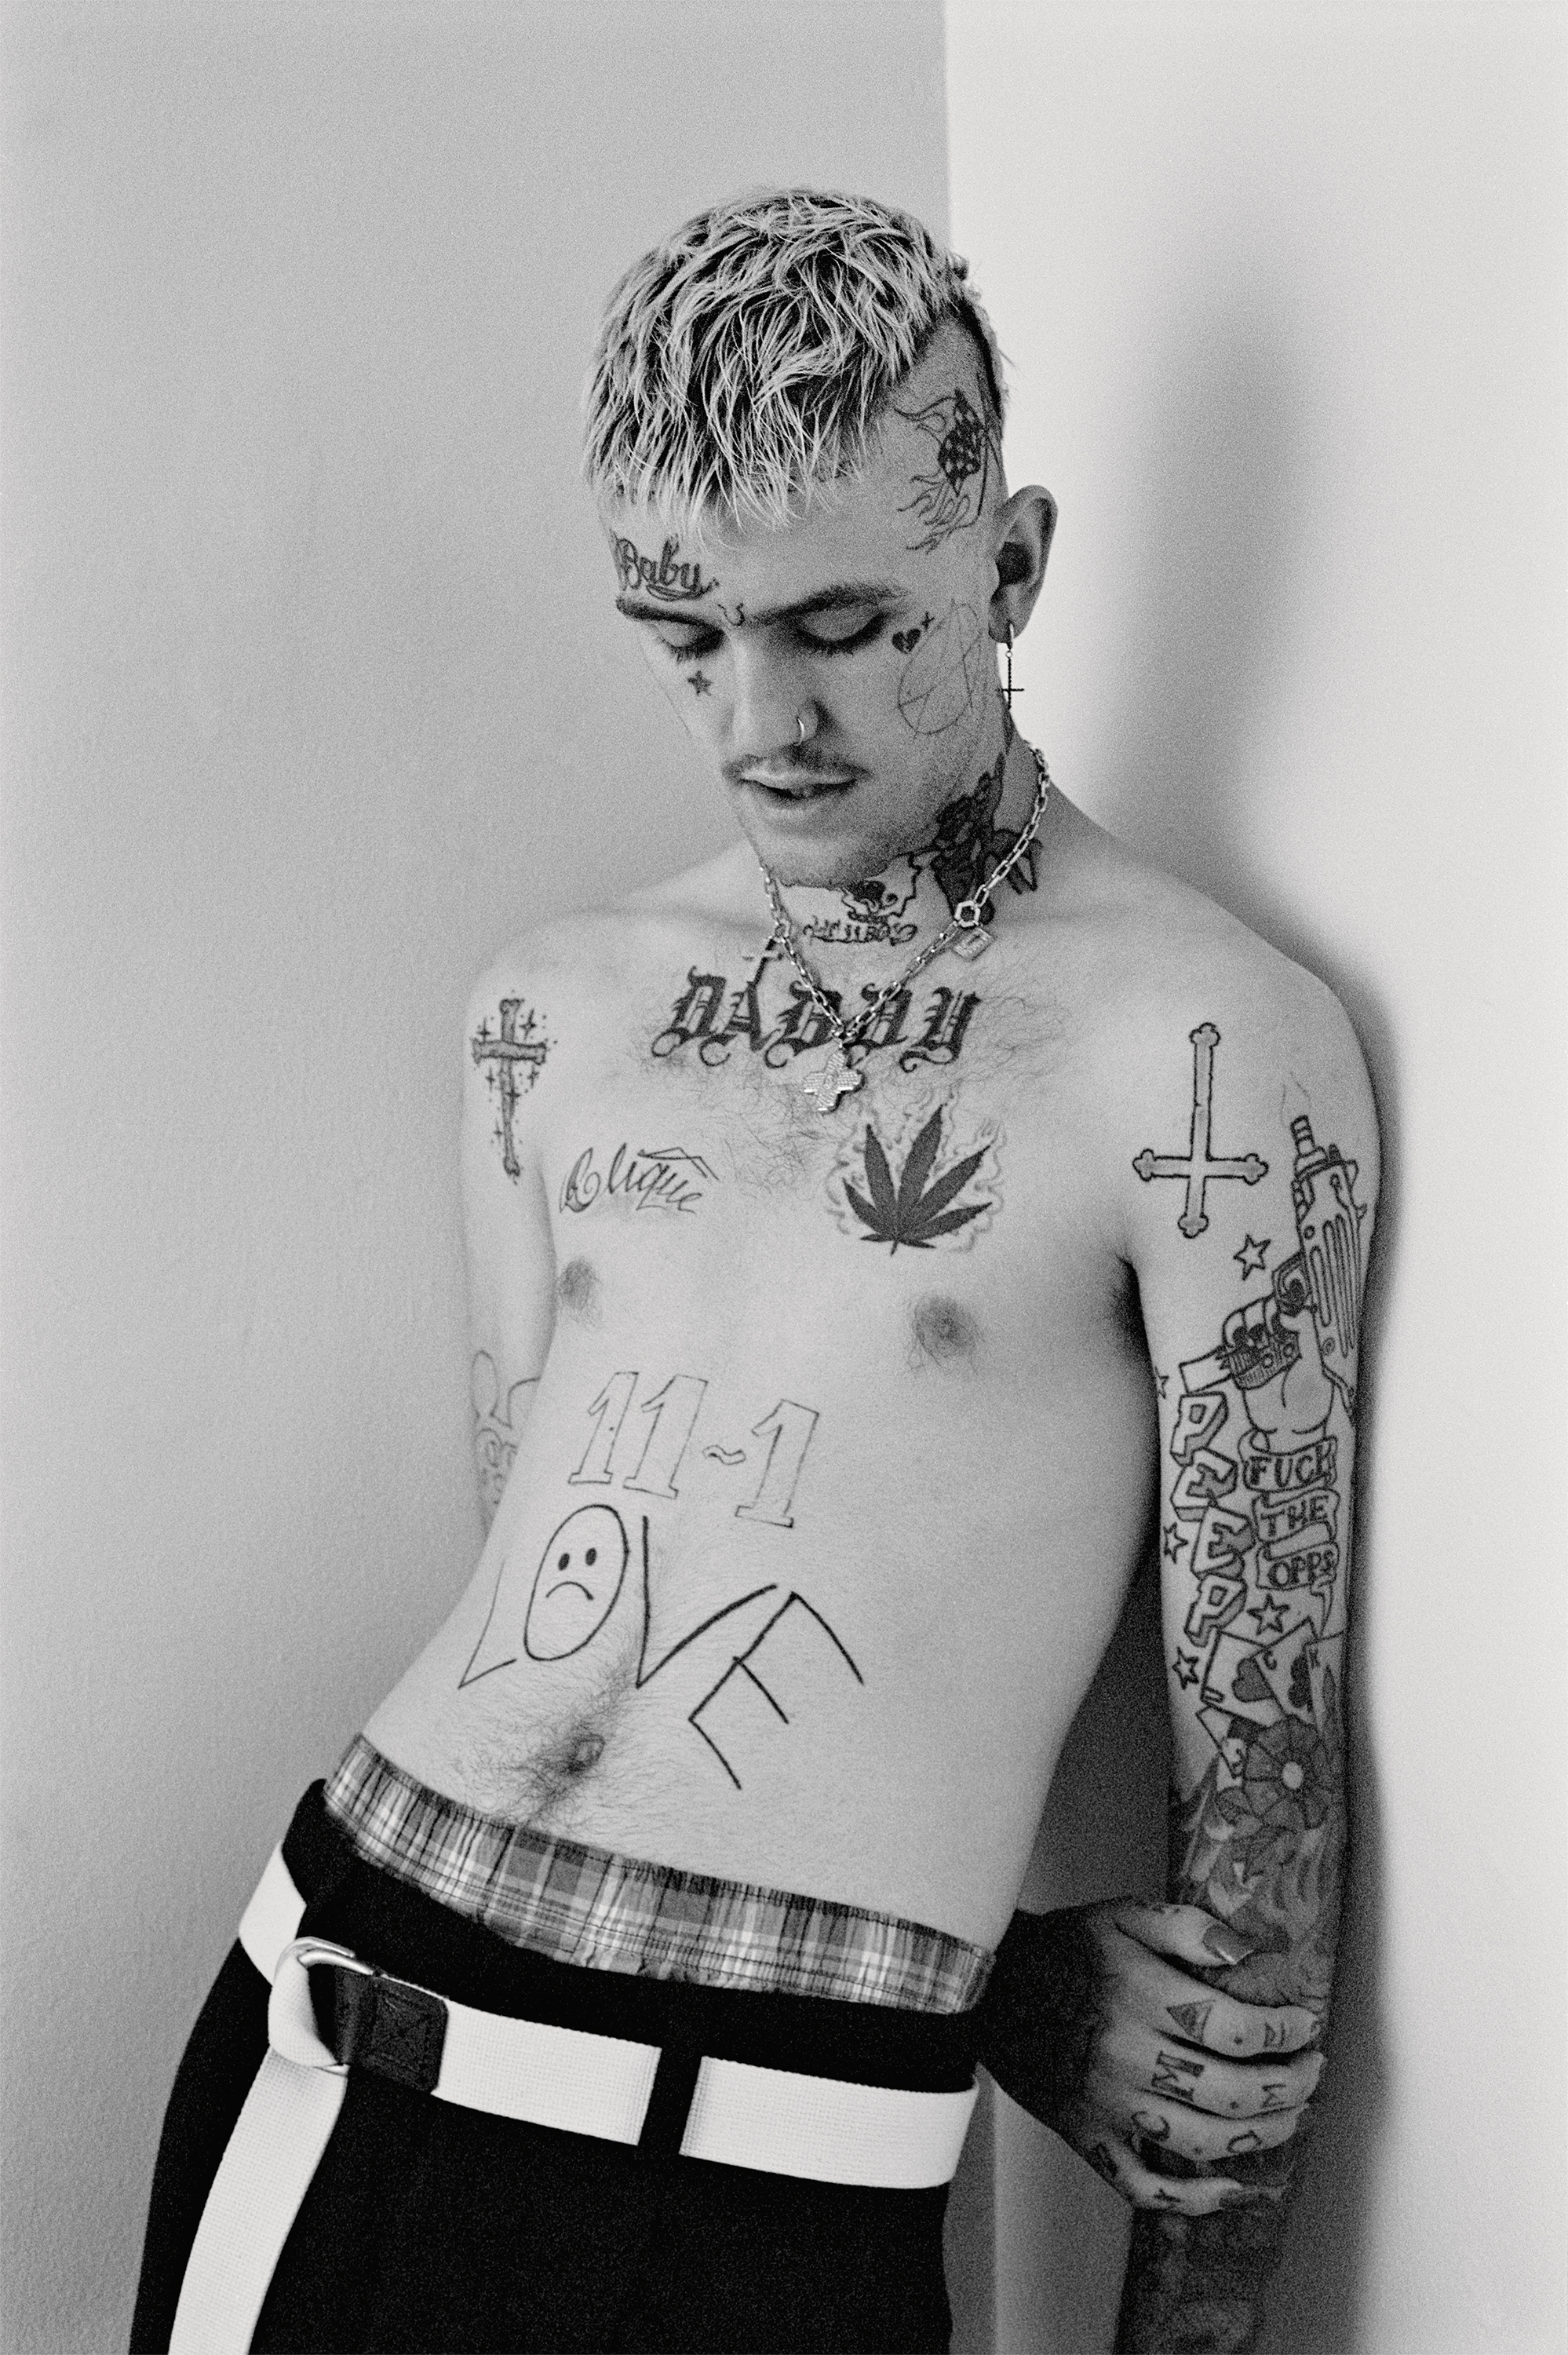 It's getting worse and worse': Lil Peep's heartbreaking final